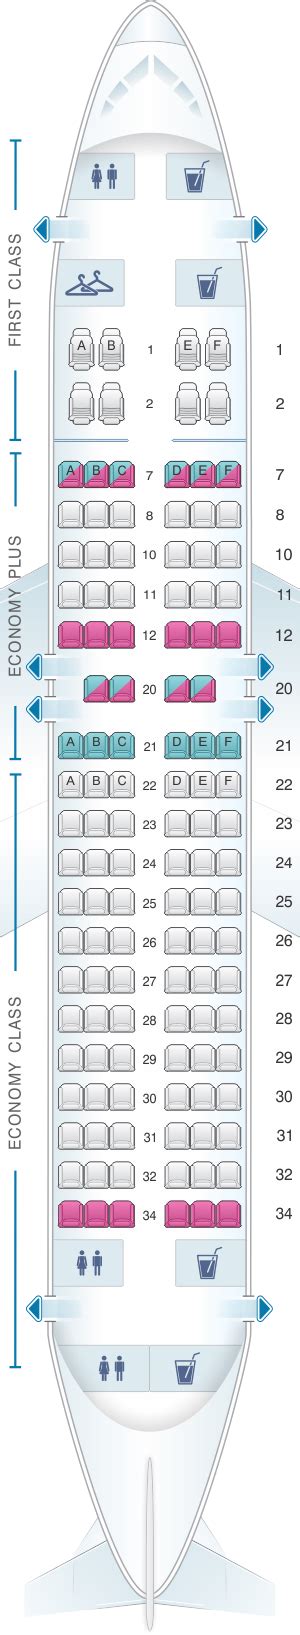 United Airlines Airbus A319 Seating Chart